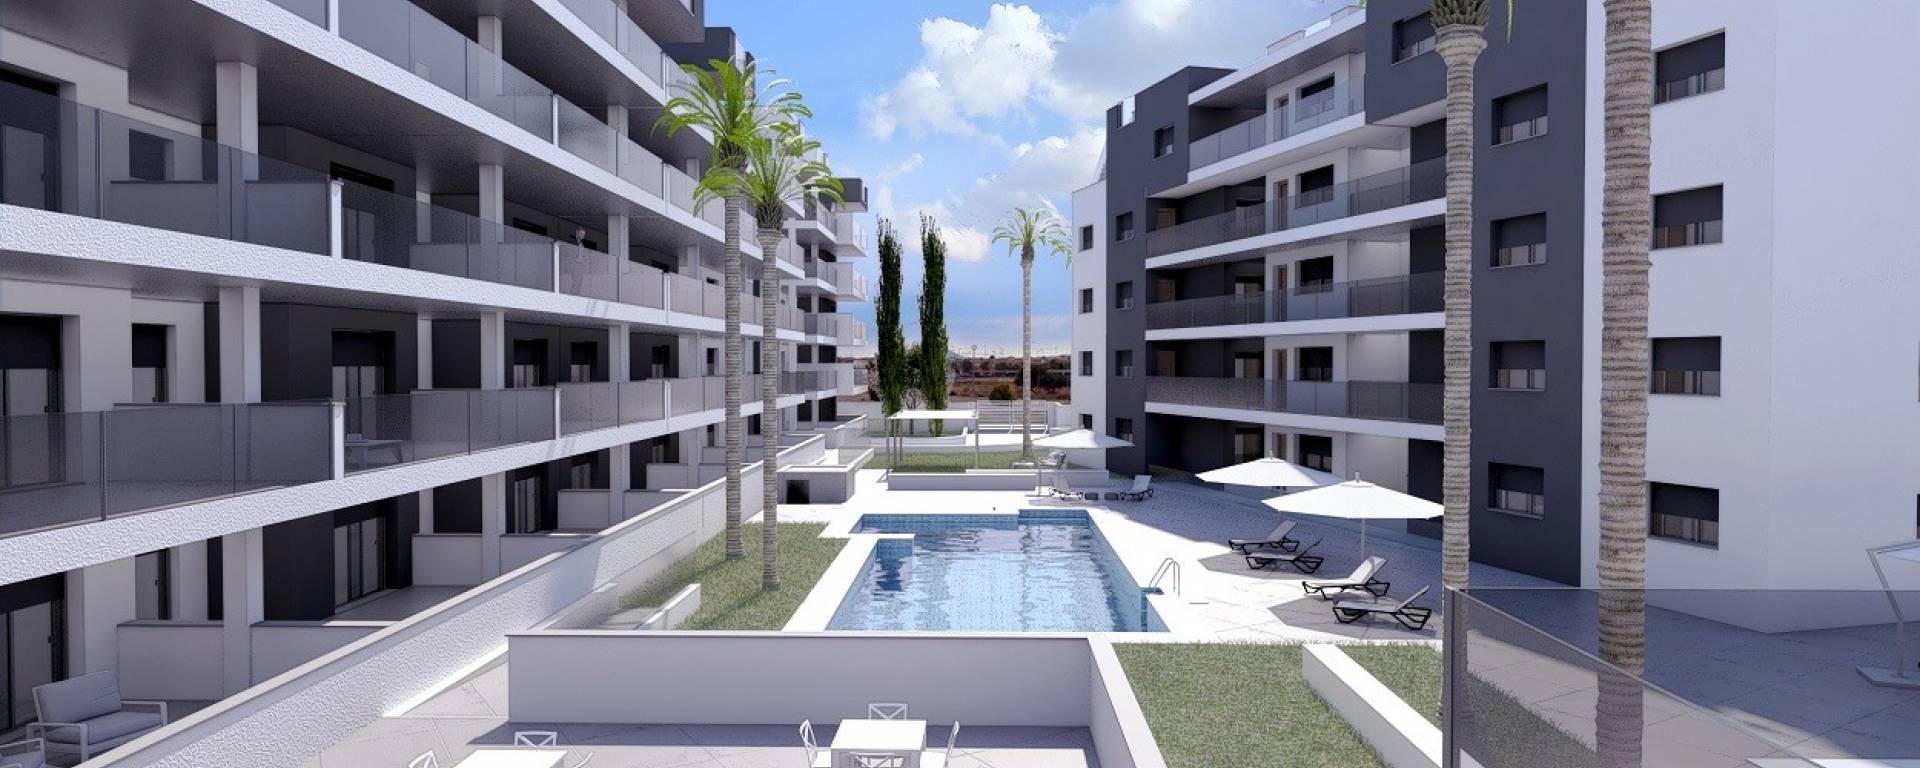 Pool and Common area at Velapi residential